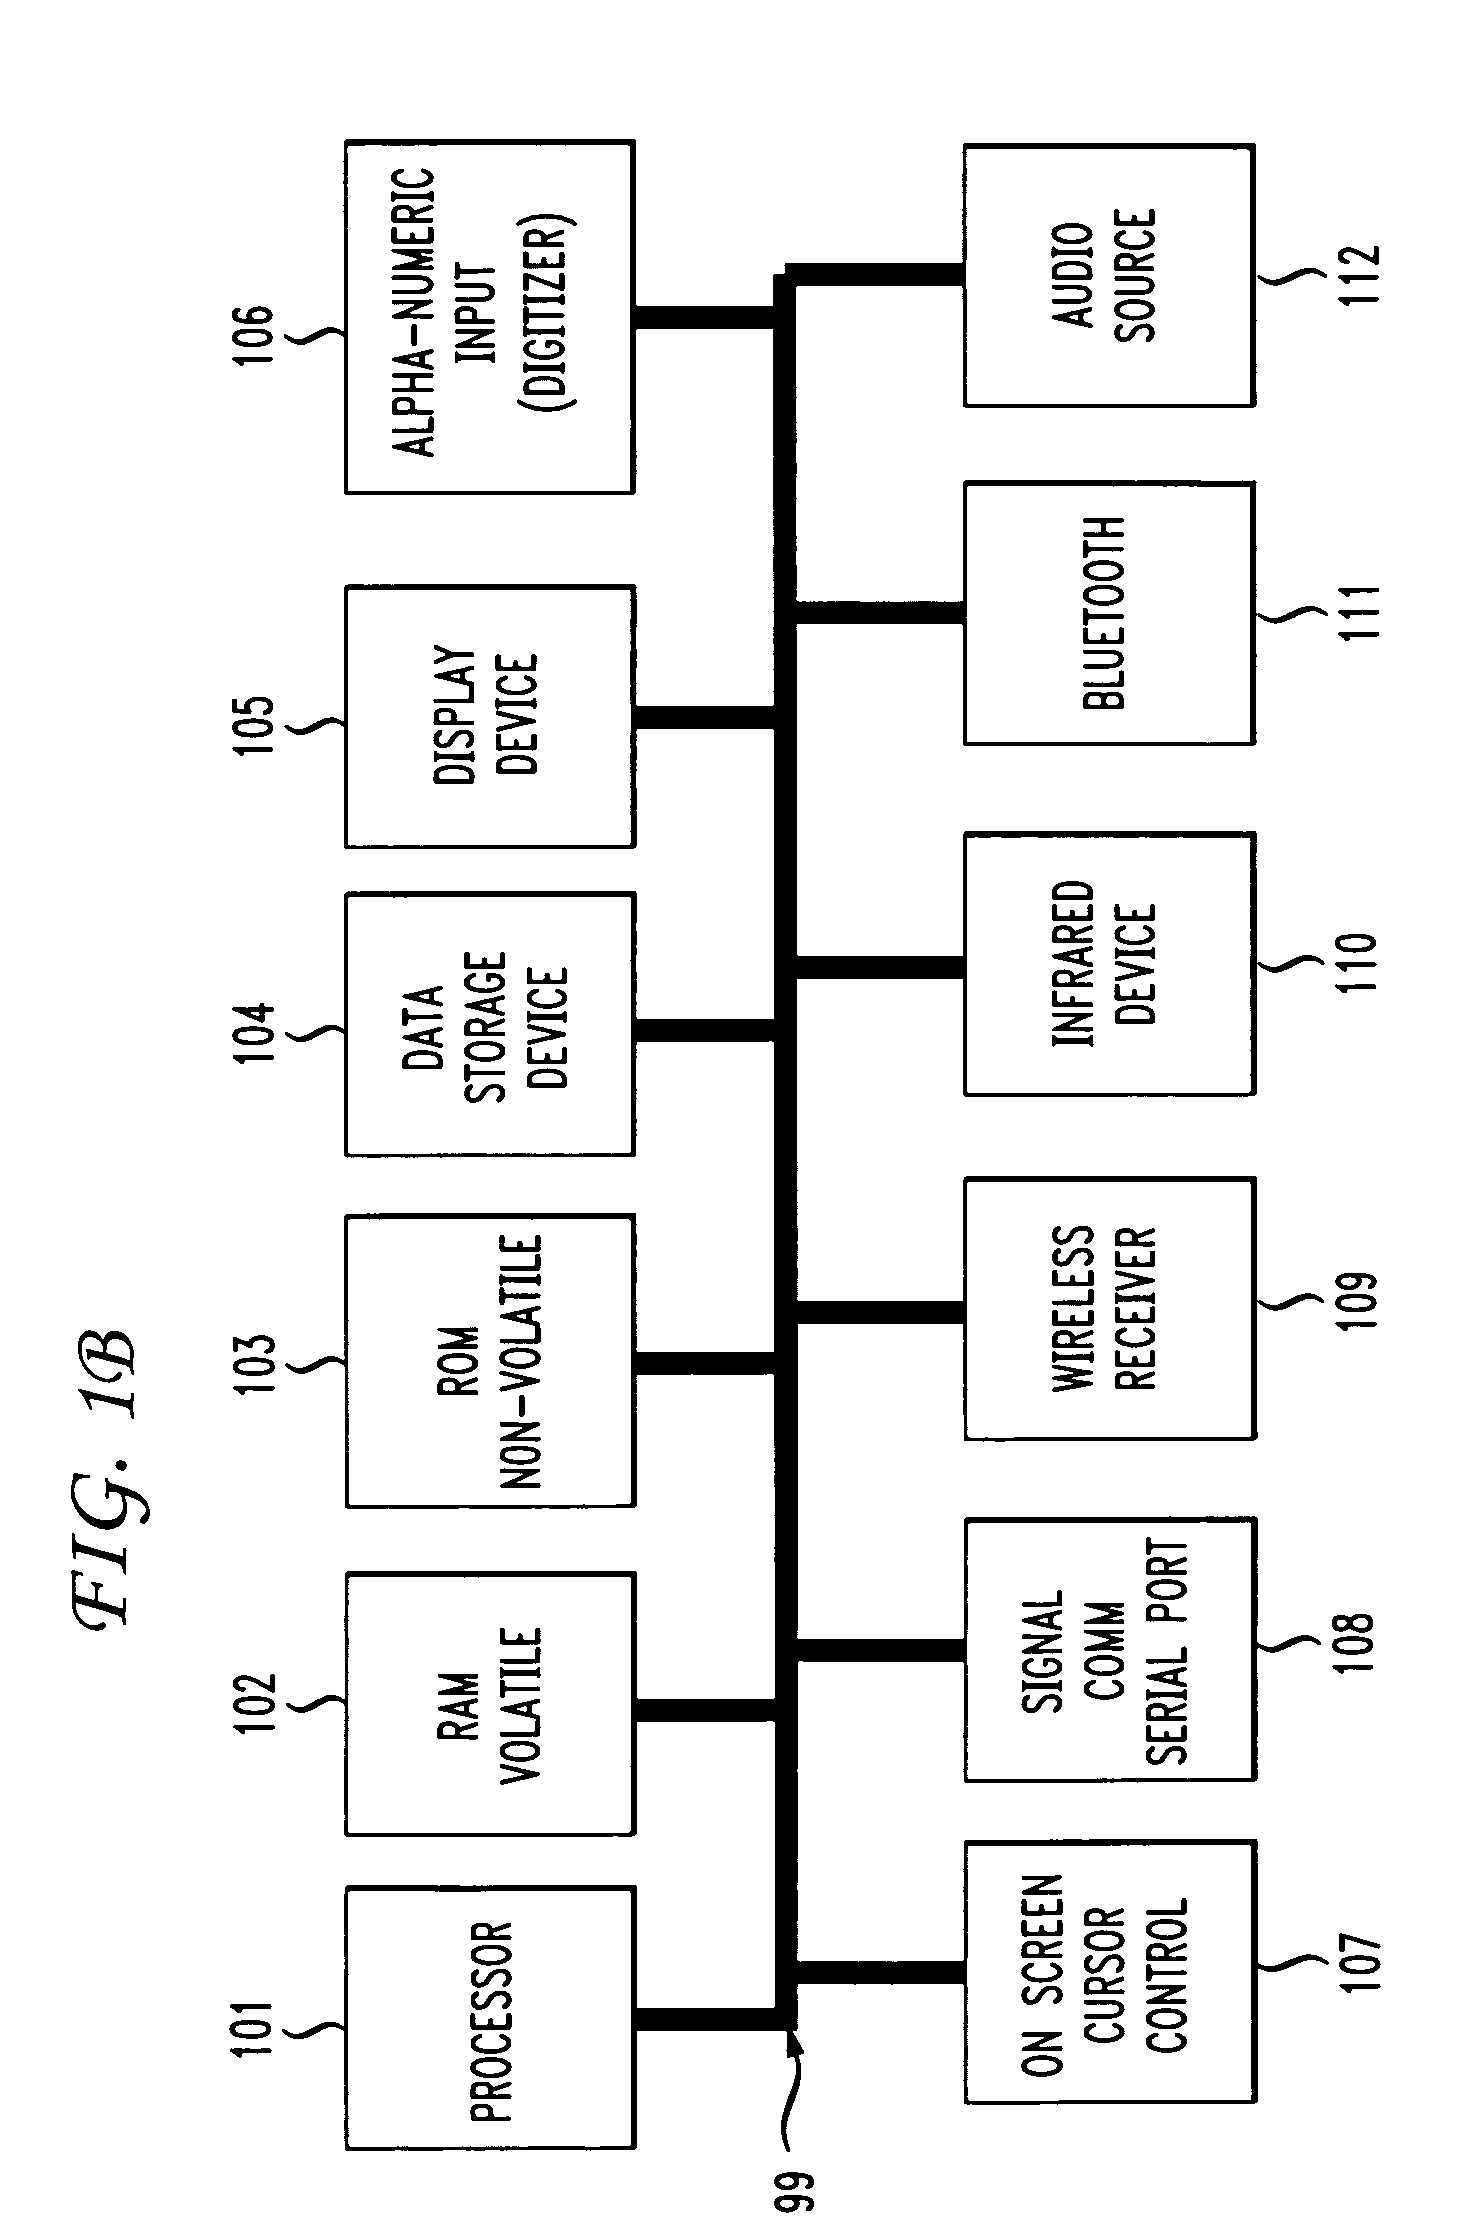 System and method for prioritizing and balancing simultaneous audio outputs in a handheld device